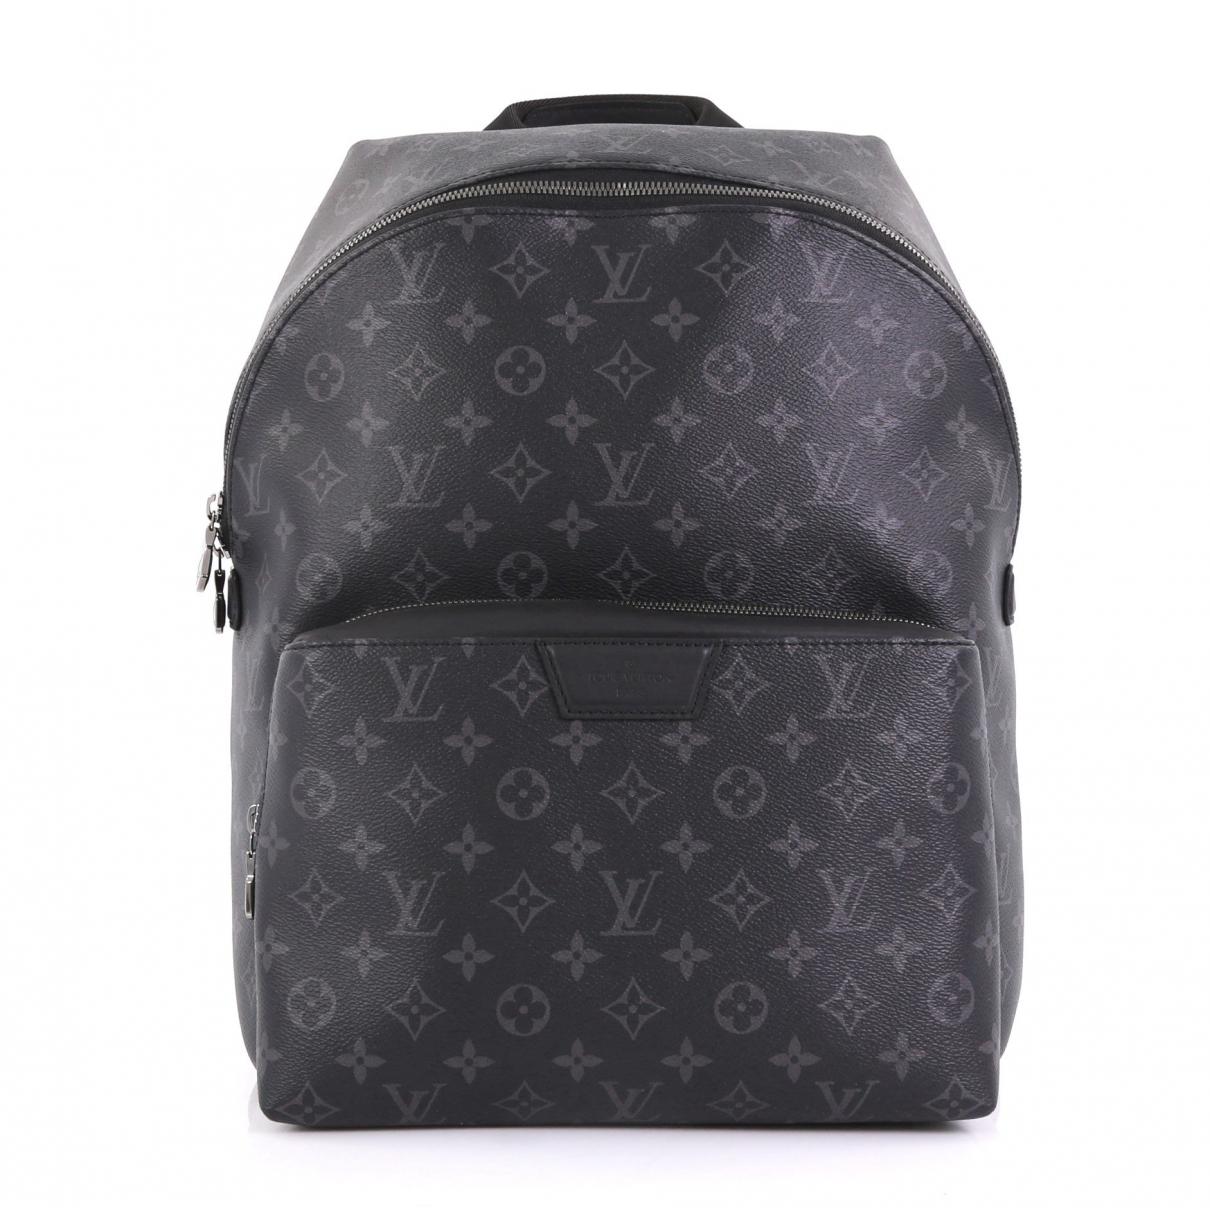  Louis  Vuitton  Apollo Backpack  Black  Cloth Bag in Black  for 